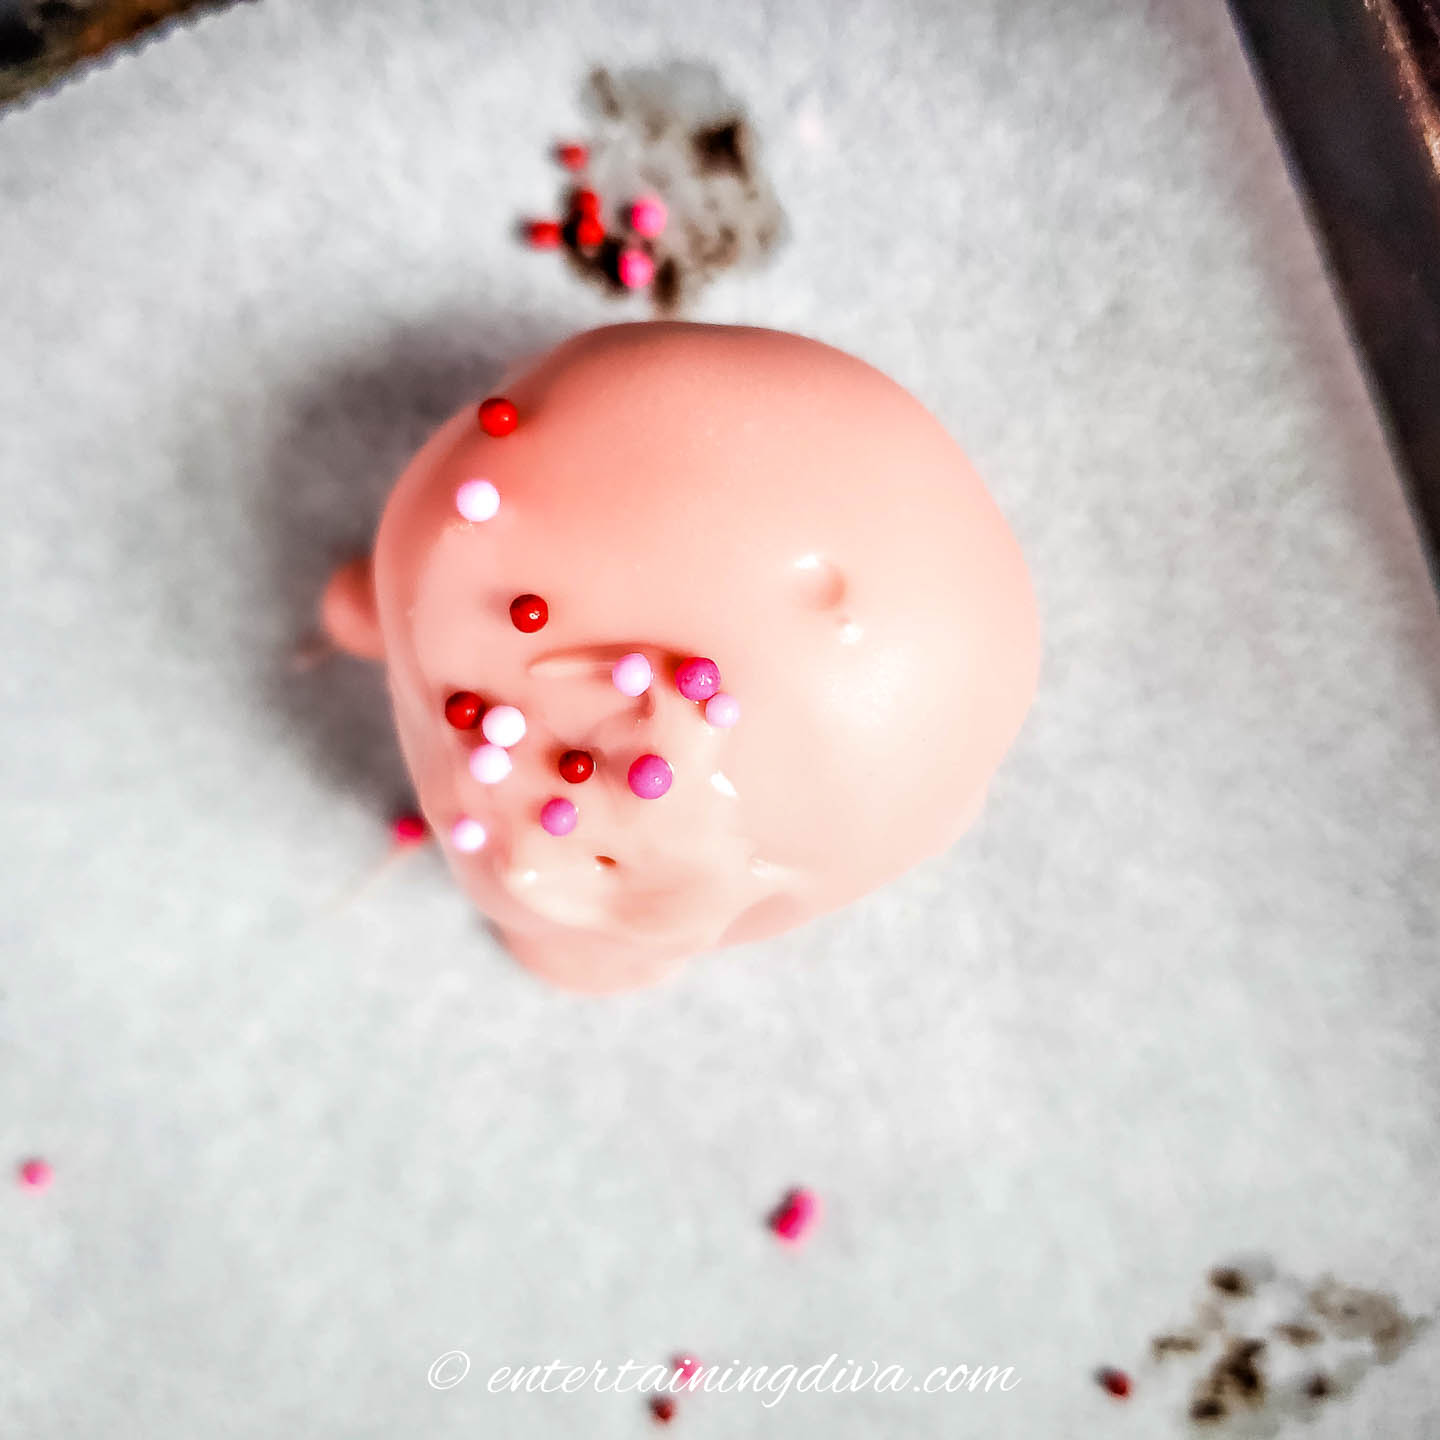 Oreo ball with pink coating and sprinkles